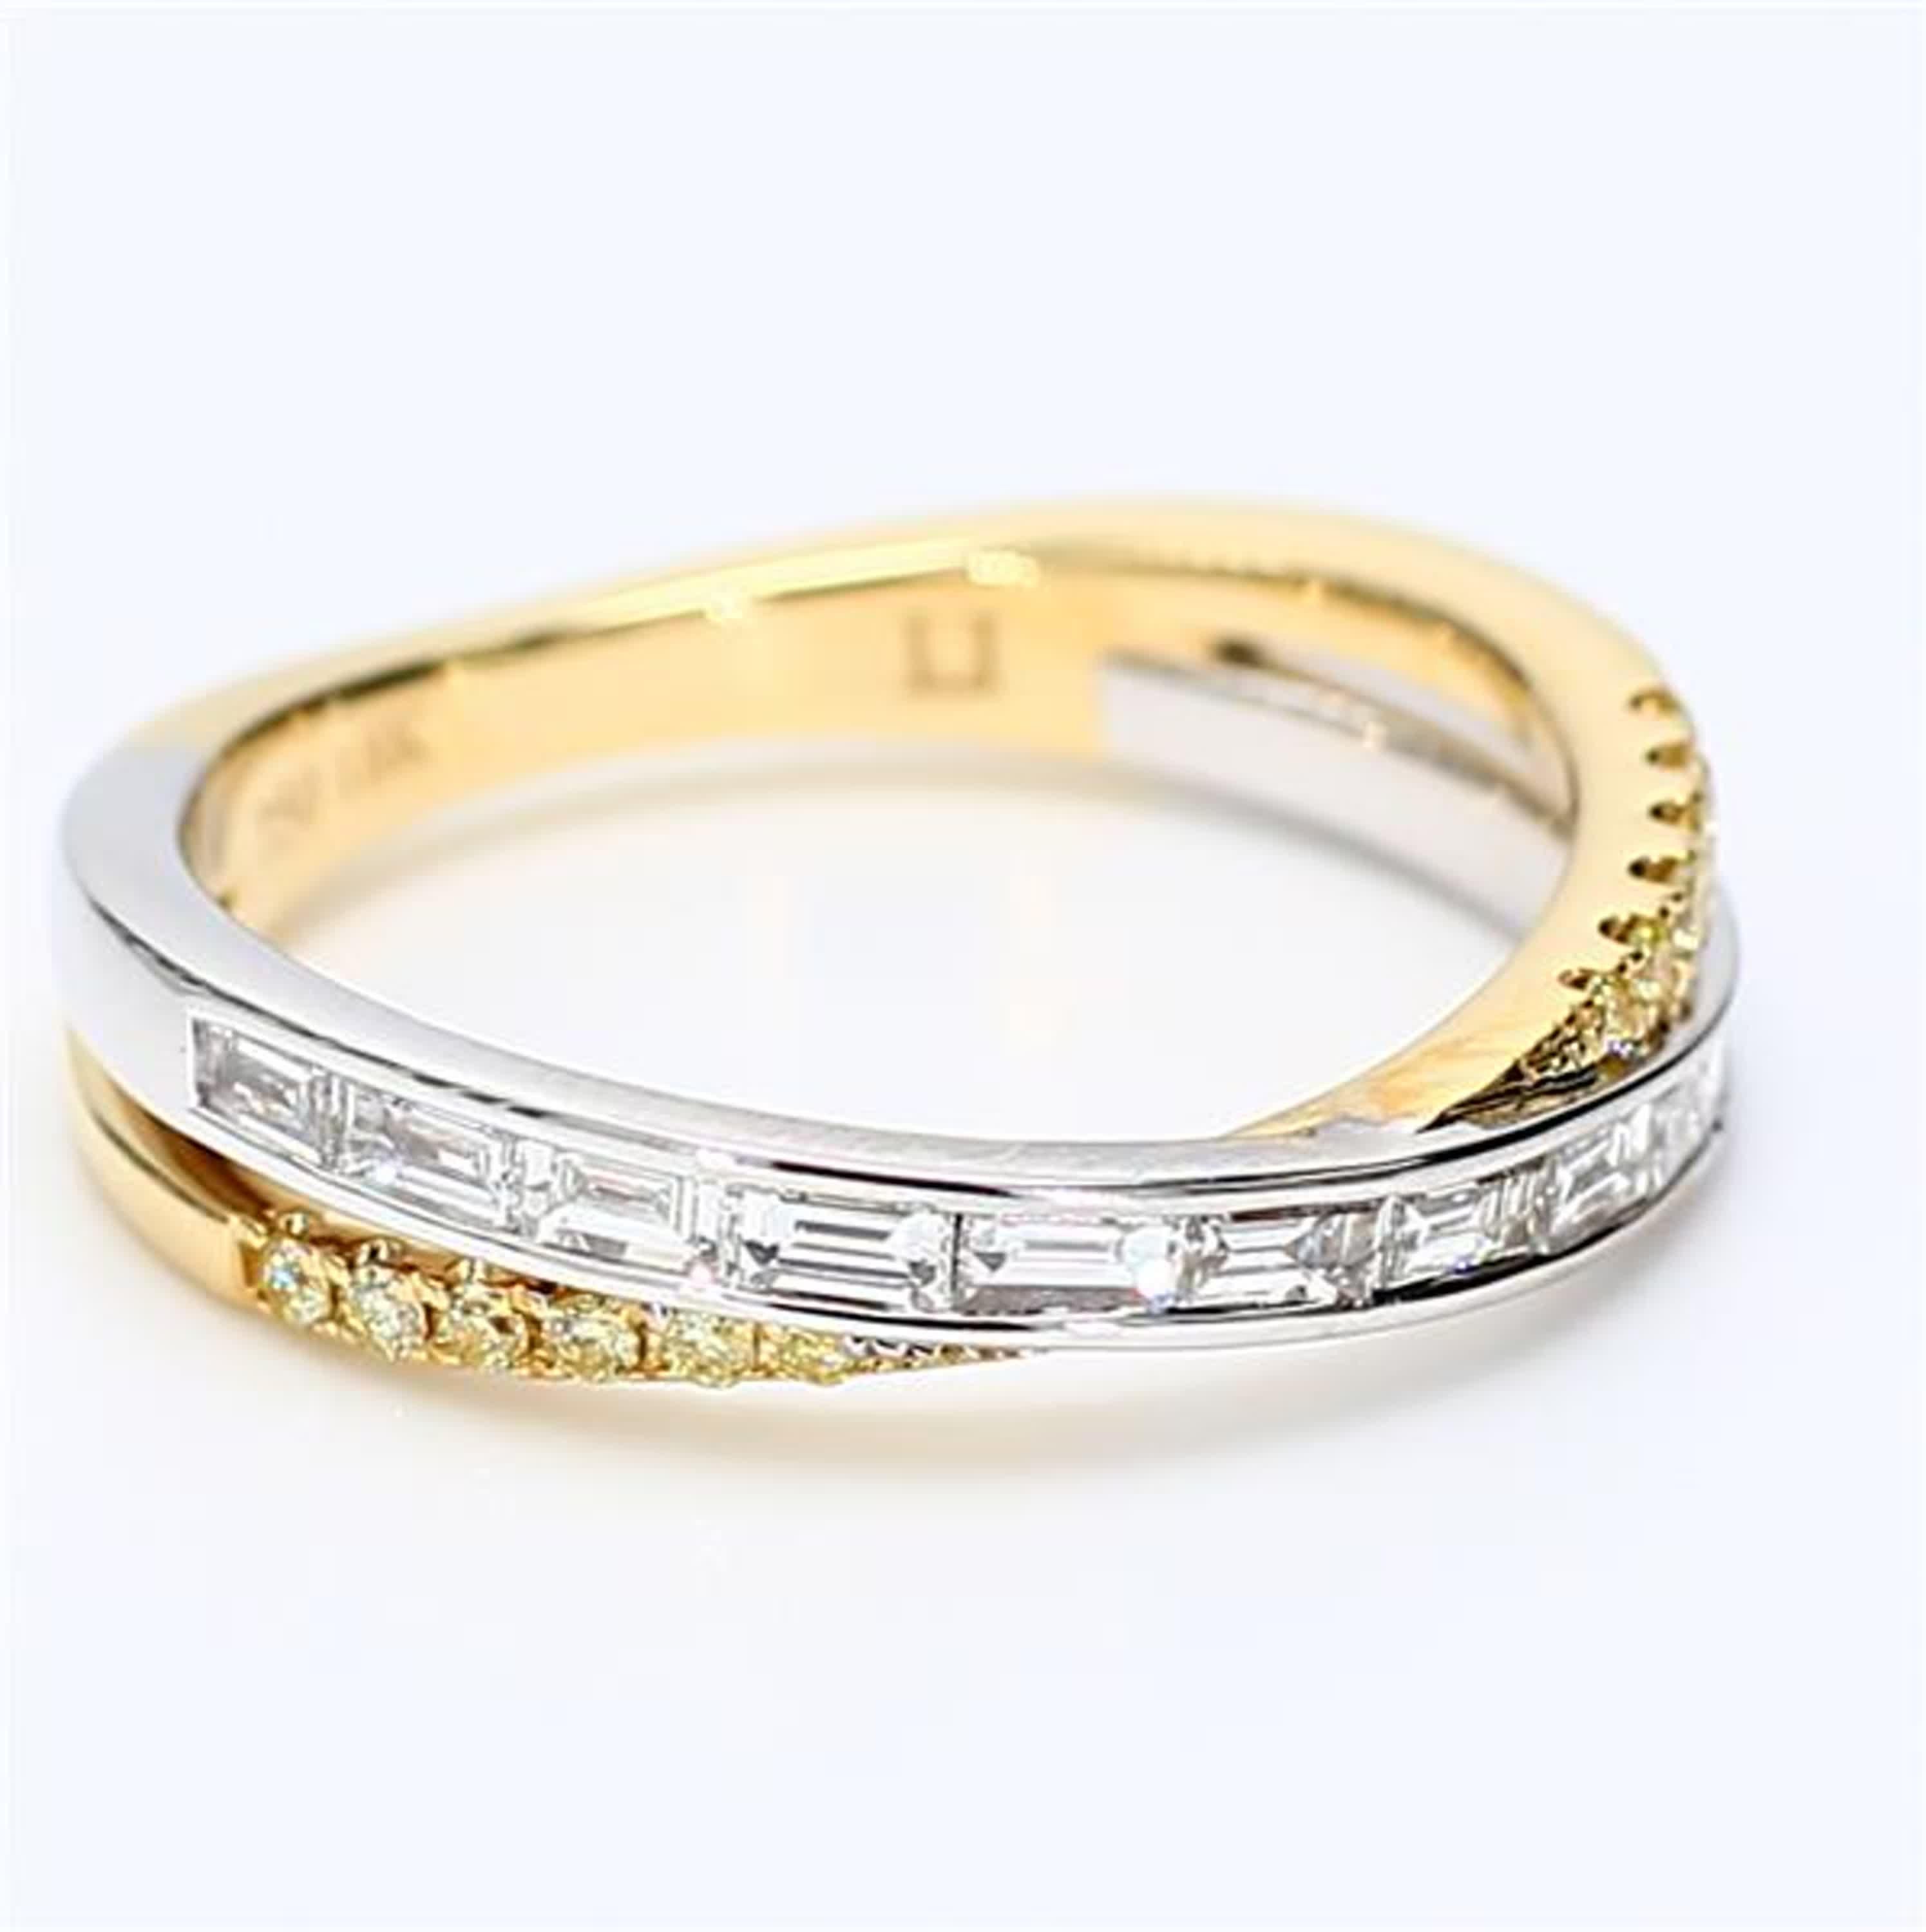 Natural White Baguette and Yellow Diamond .48 Carat TW Gold Wedding Band For Sale 1